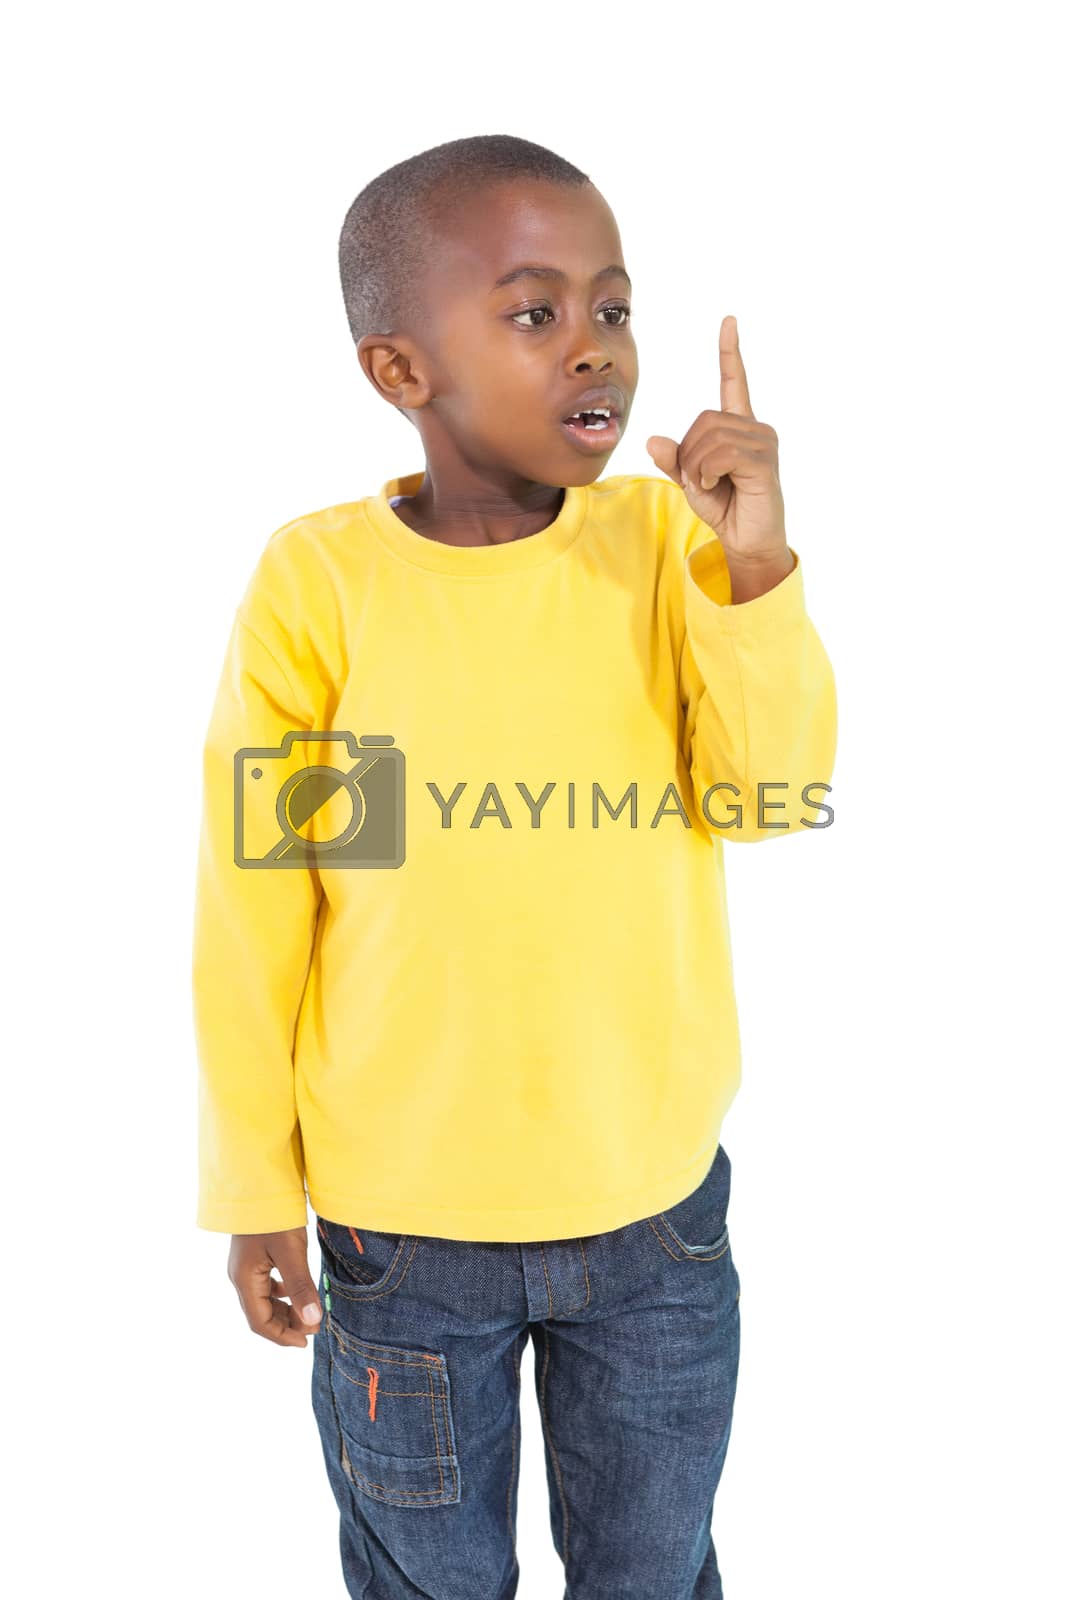 Royalty free image of Happy little boy pointing up by Wavebreakmedia